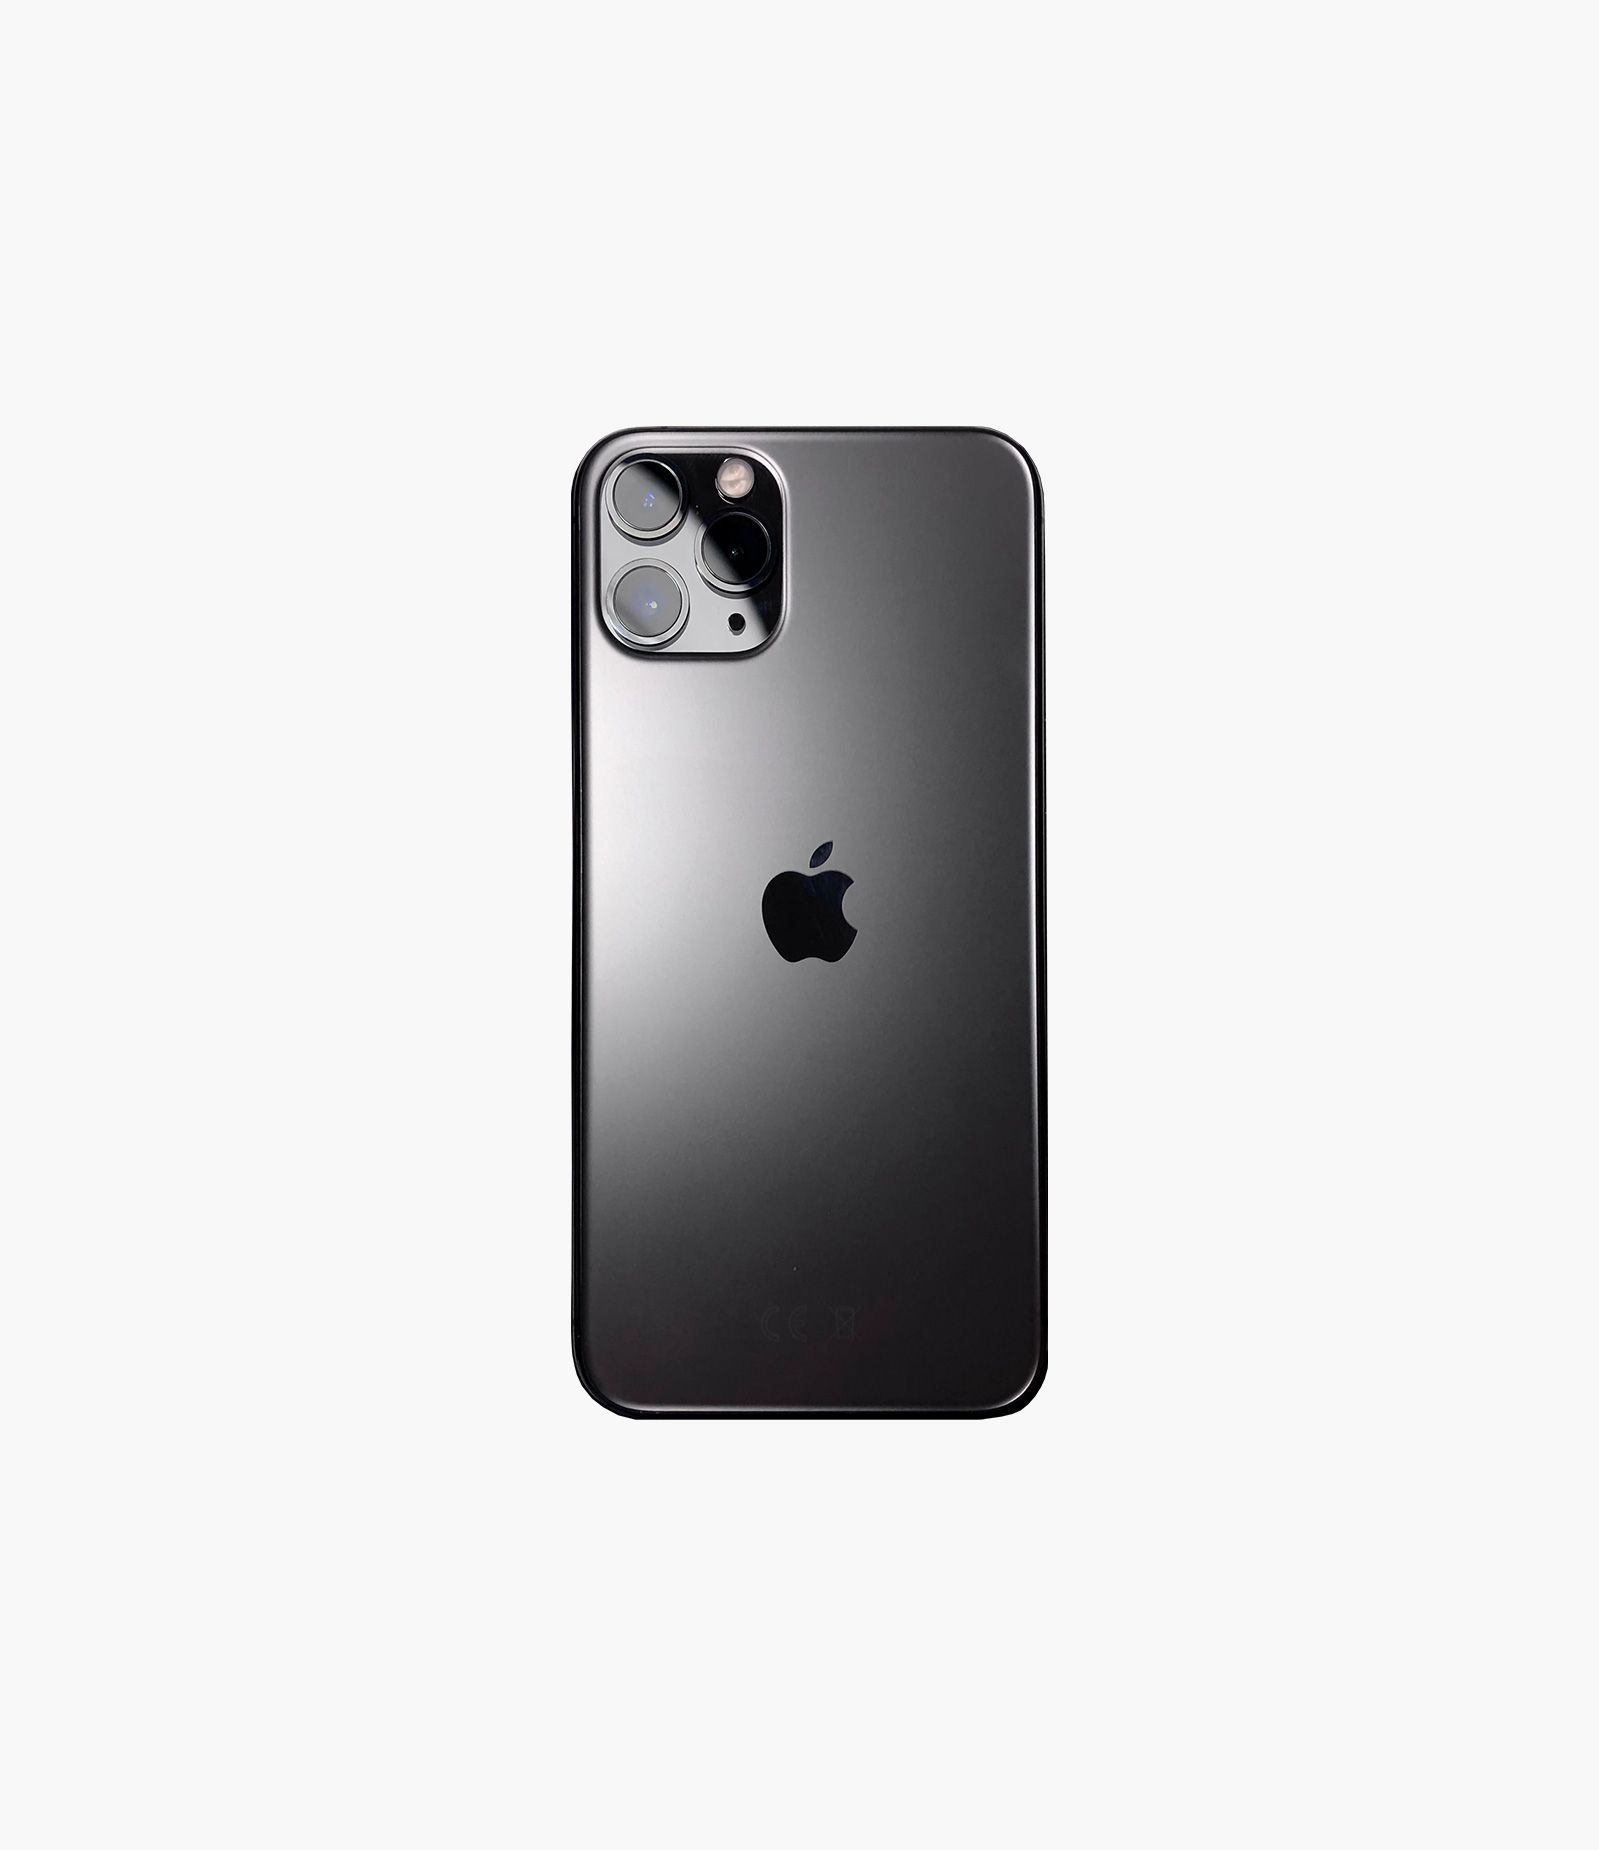 Clínica Cedig - Apple iPhone 11 Pro 256GB Space Gray